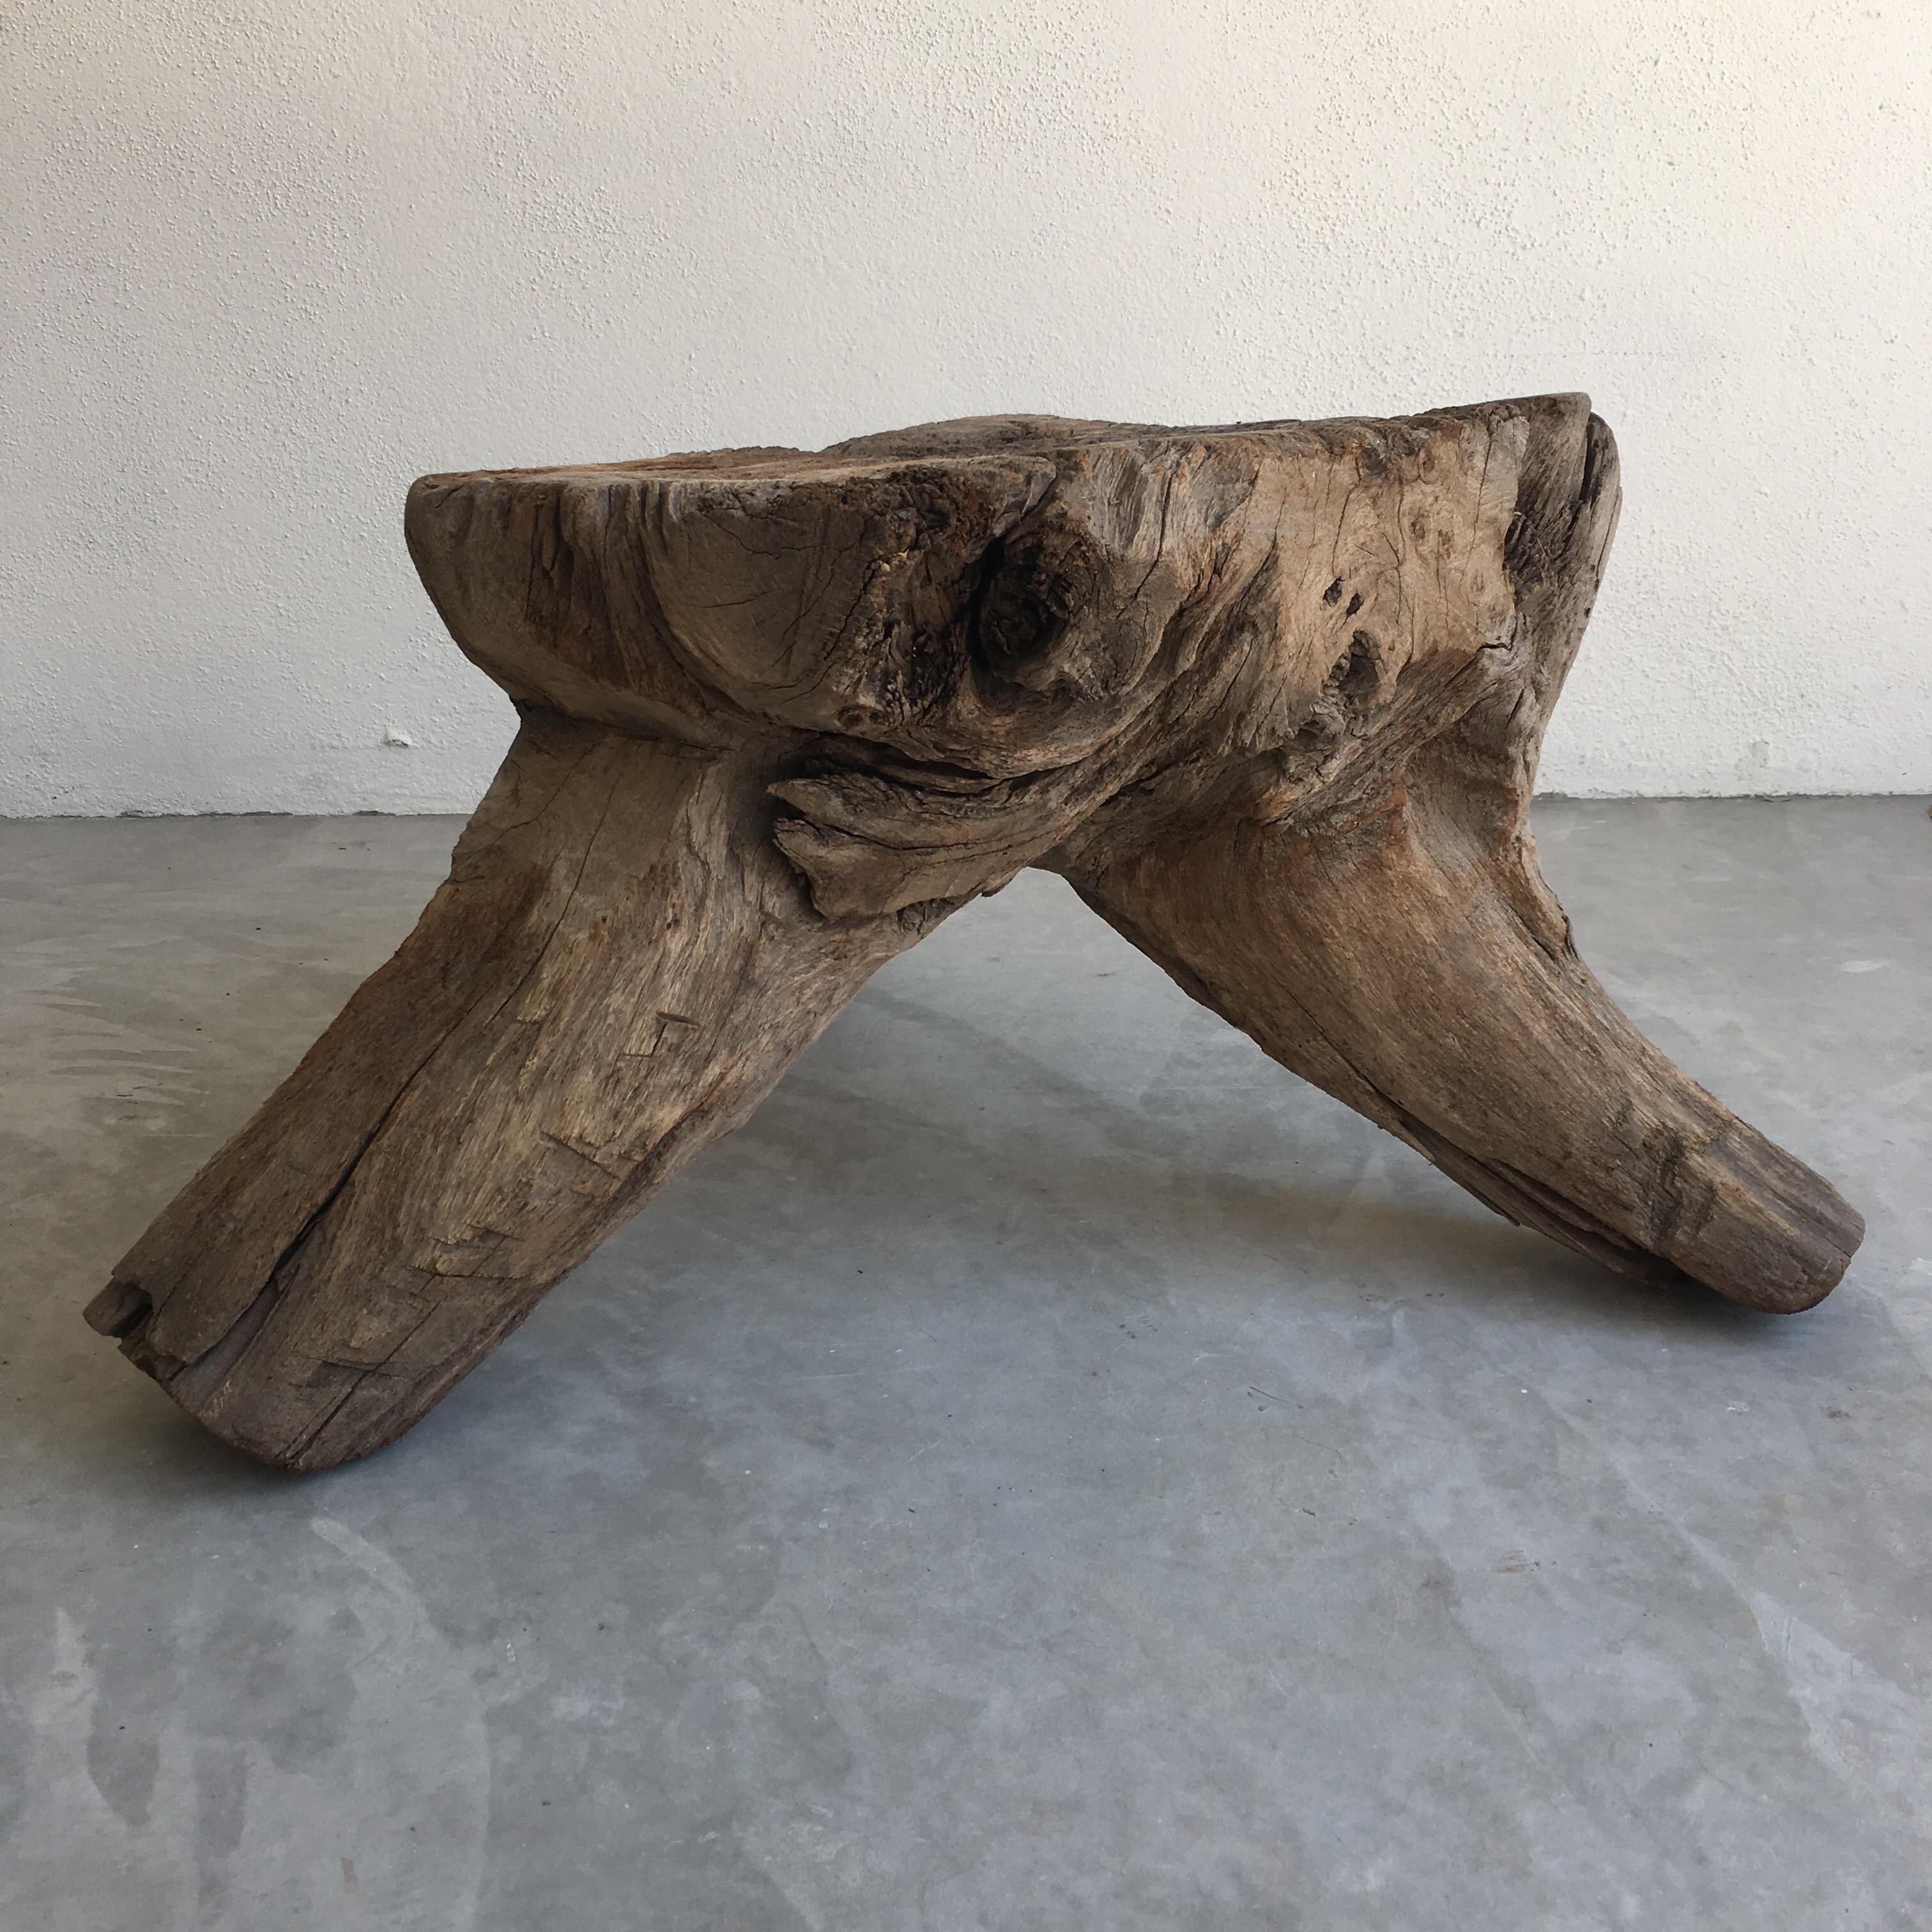 Primitive-syled stool from Mexico's Sierra Gorda carved in one piece of mesquite hardwood.